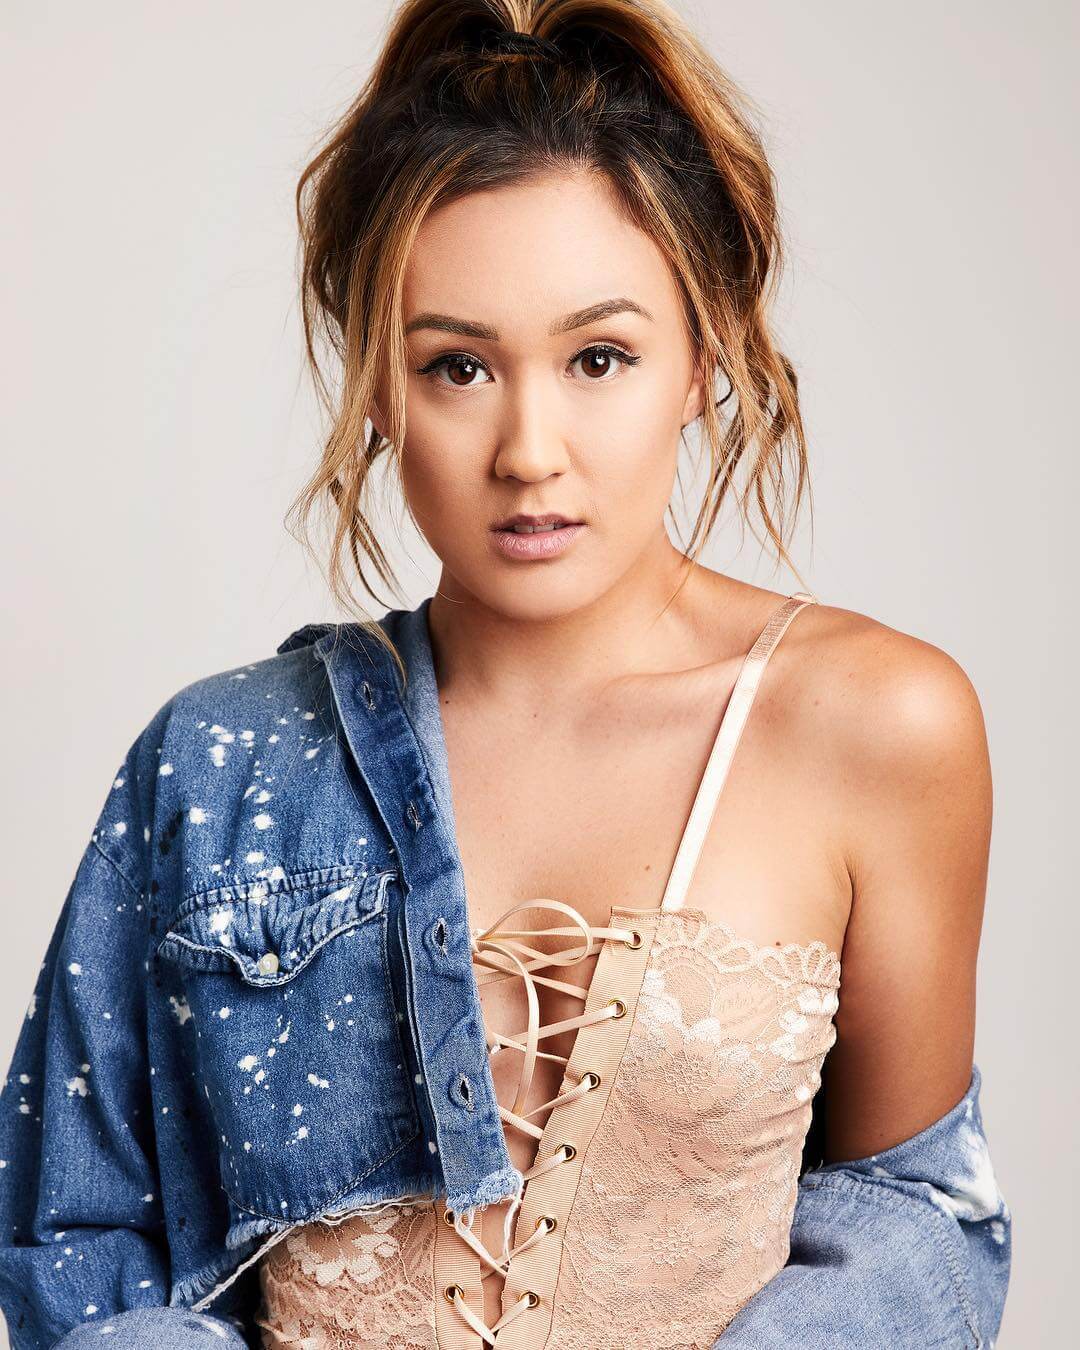 51 Sexy LaurDIY Boobs Pictures Are Essentially Attractive 43